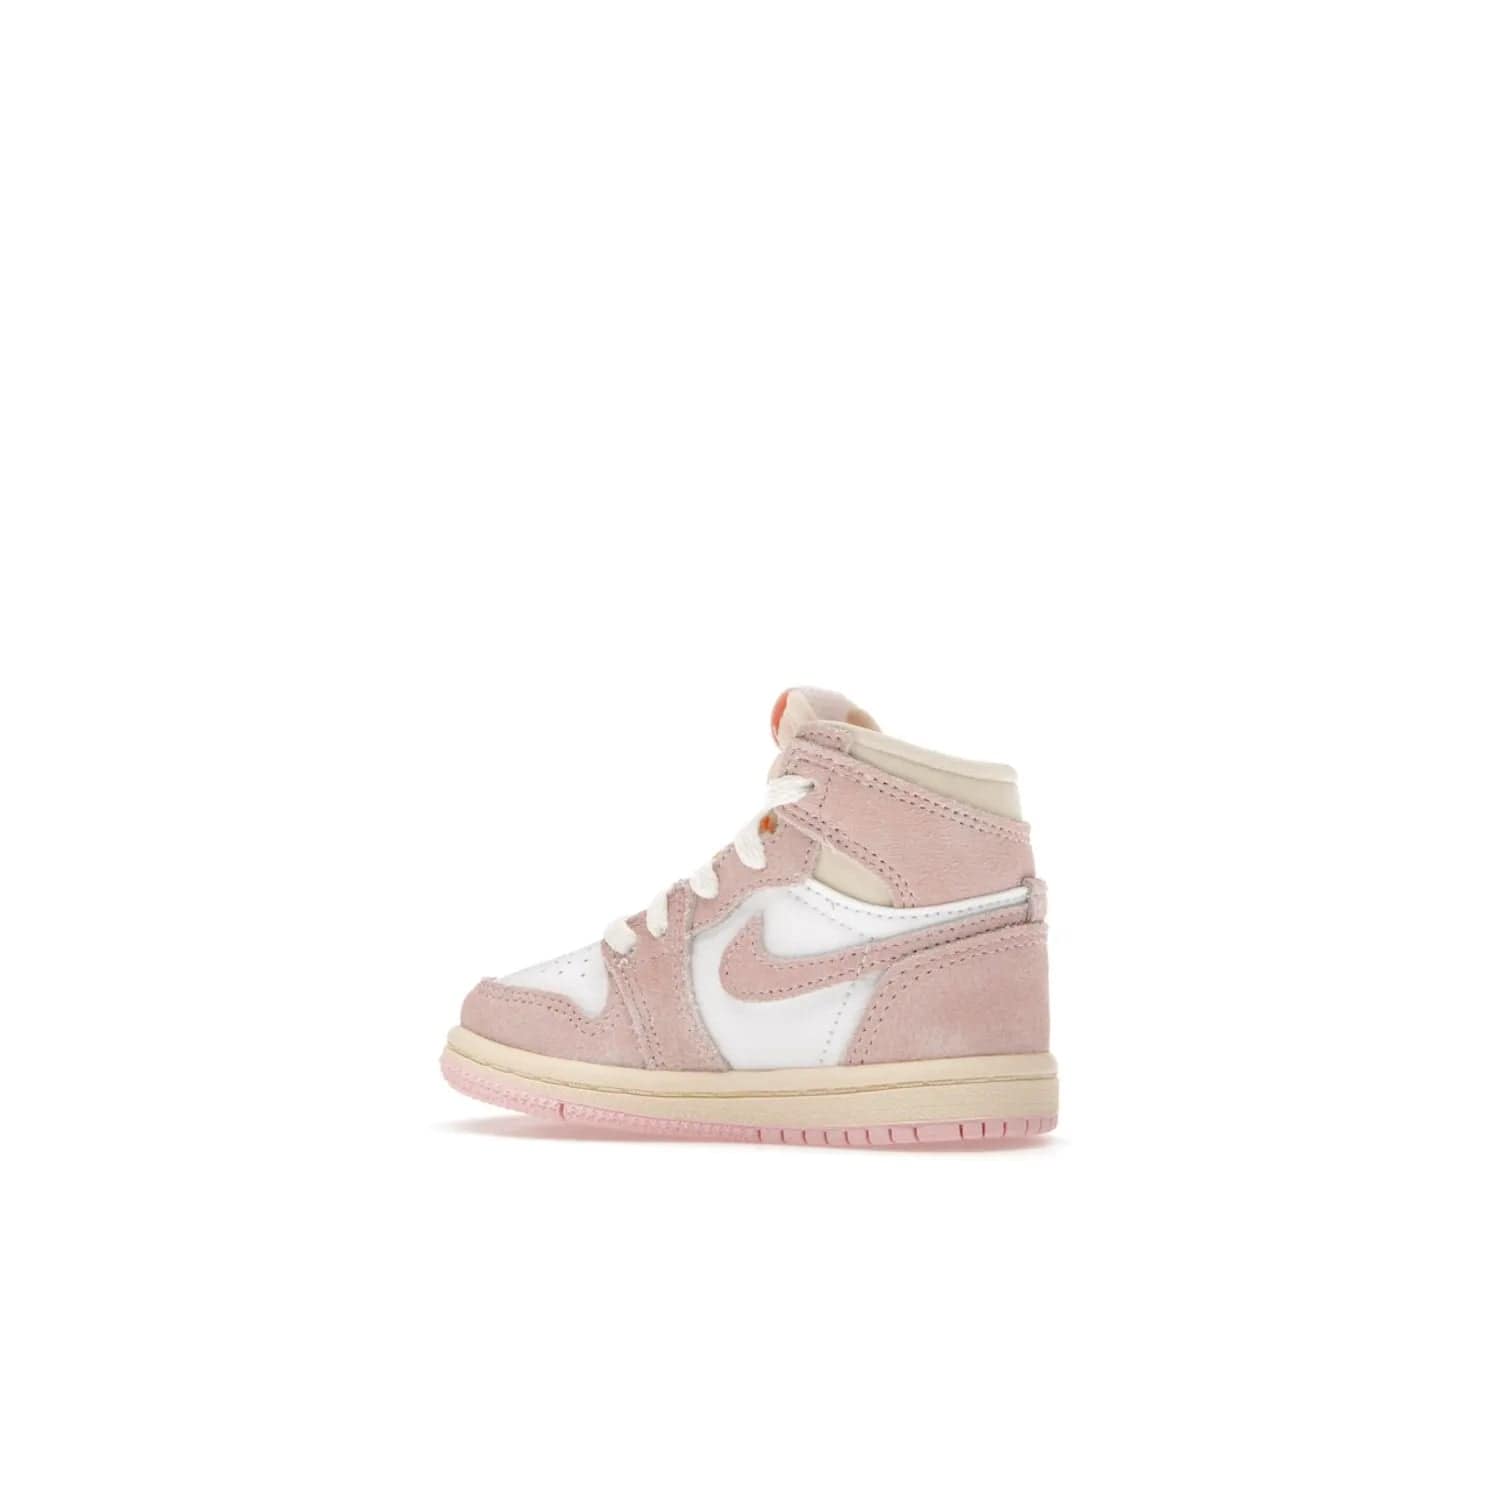 Jordan 1 Retro High OG Washed Pink (TD) - Image 21 - Only at www.BallersClubKickz.com - Retro style meets modern comfort: Introducing the Jordan 1 High OG Washed Pink (TD). Combining Atmosphere/White/Muslin/Sail colors with a high-rise silhouette, these shoes will be an instant classic when they release April 22, 2023.